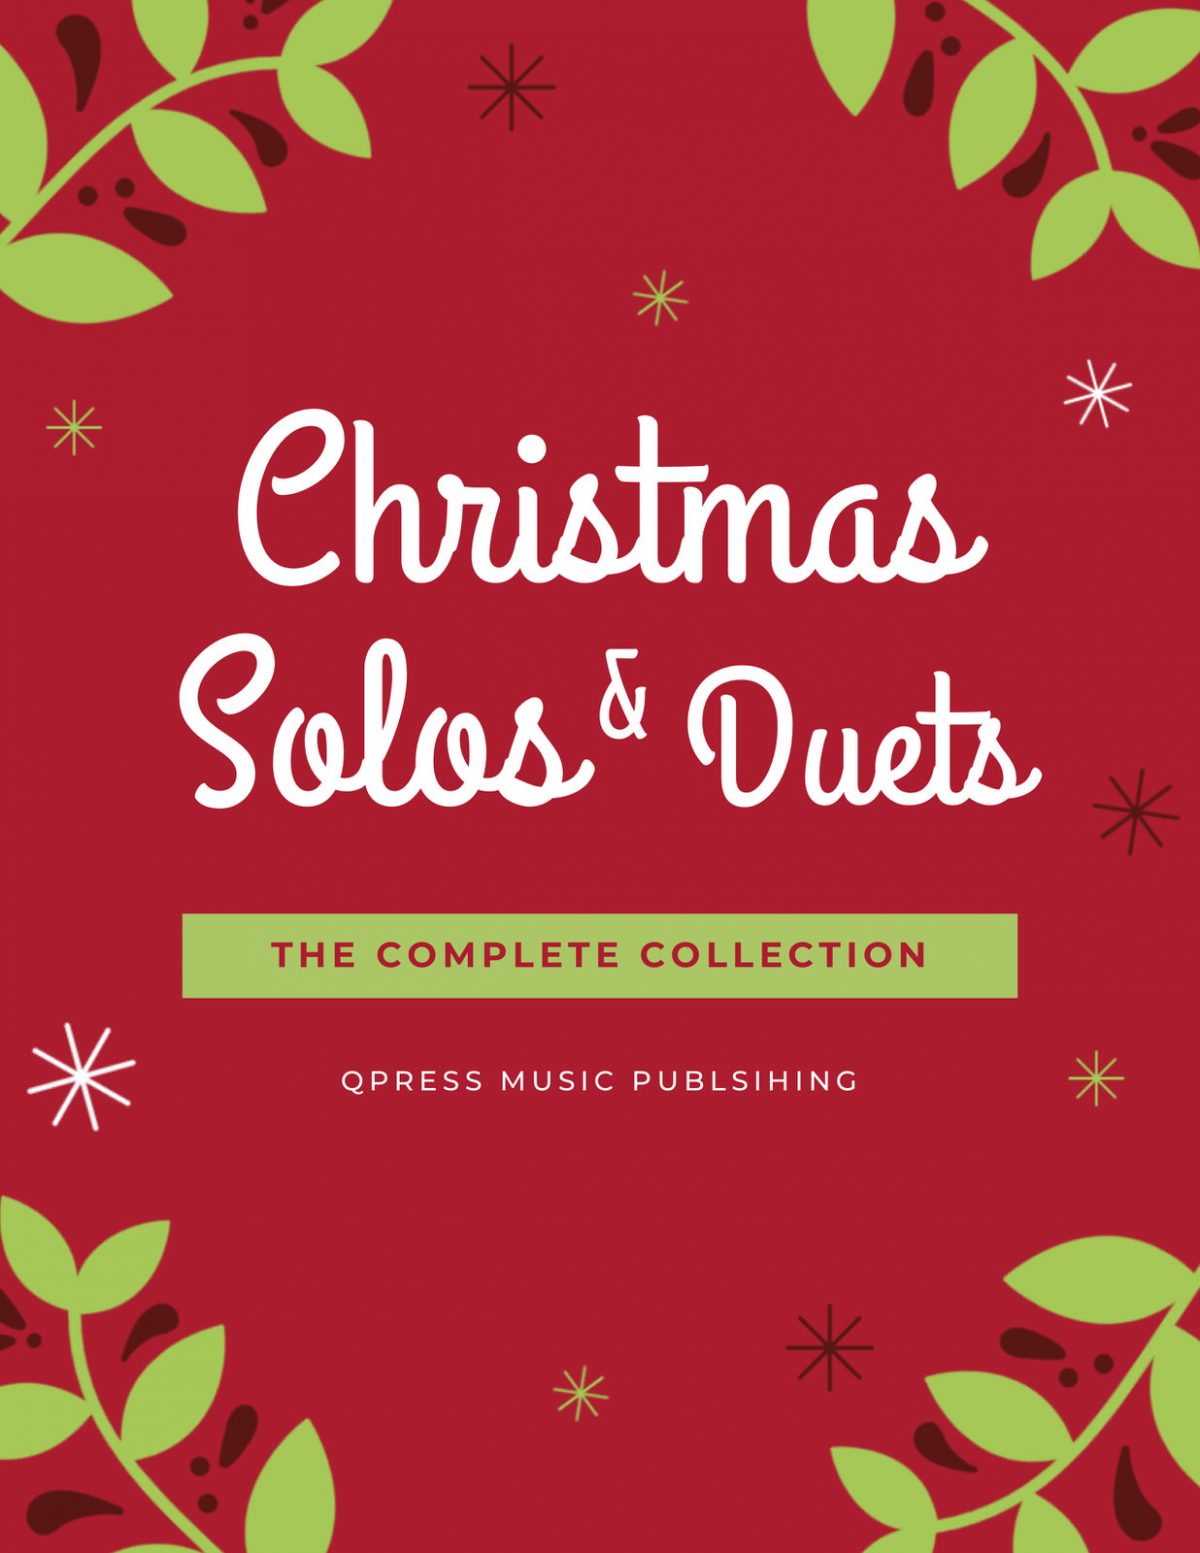 Complete Trumpet Christmas Collection